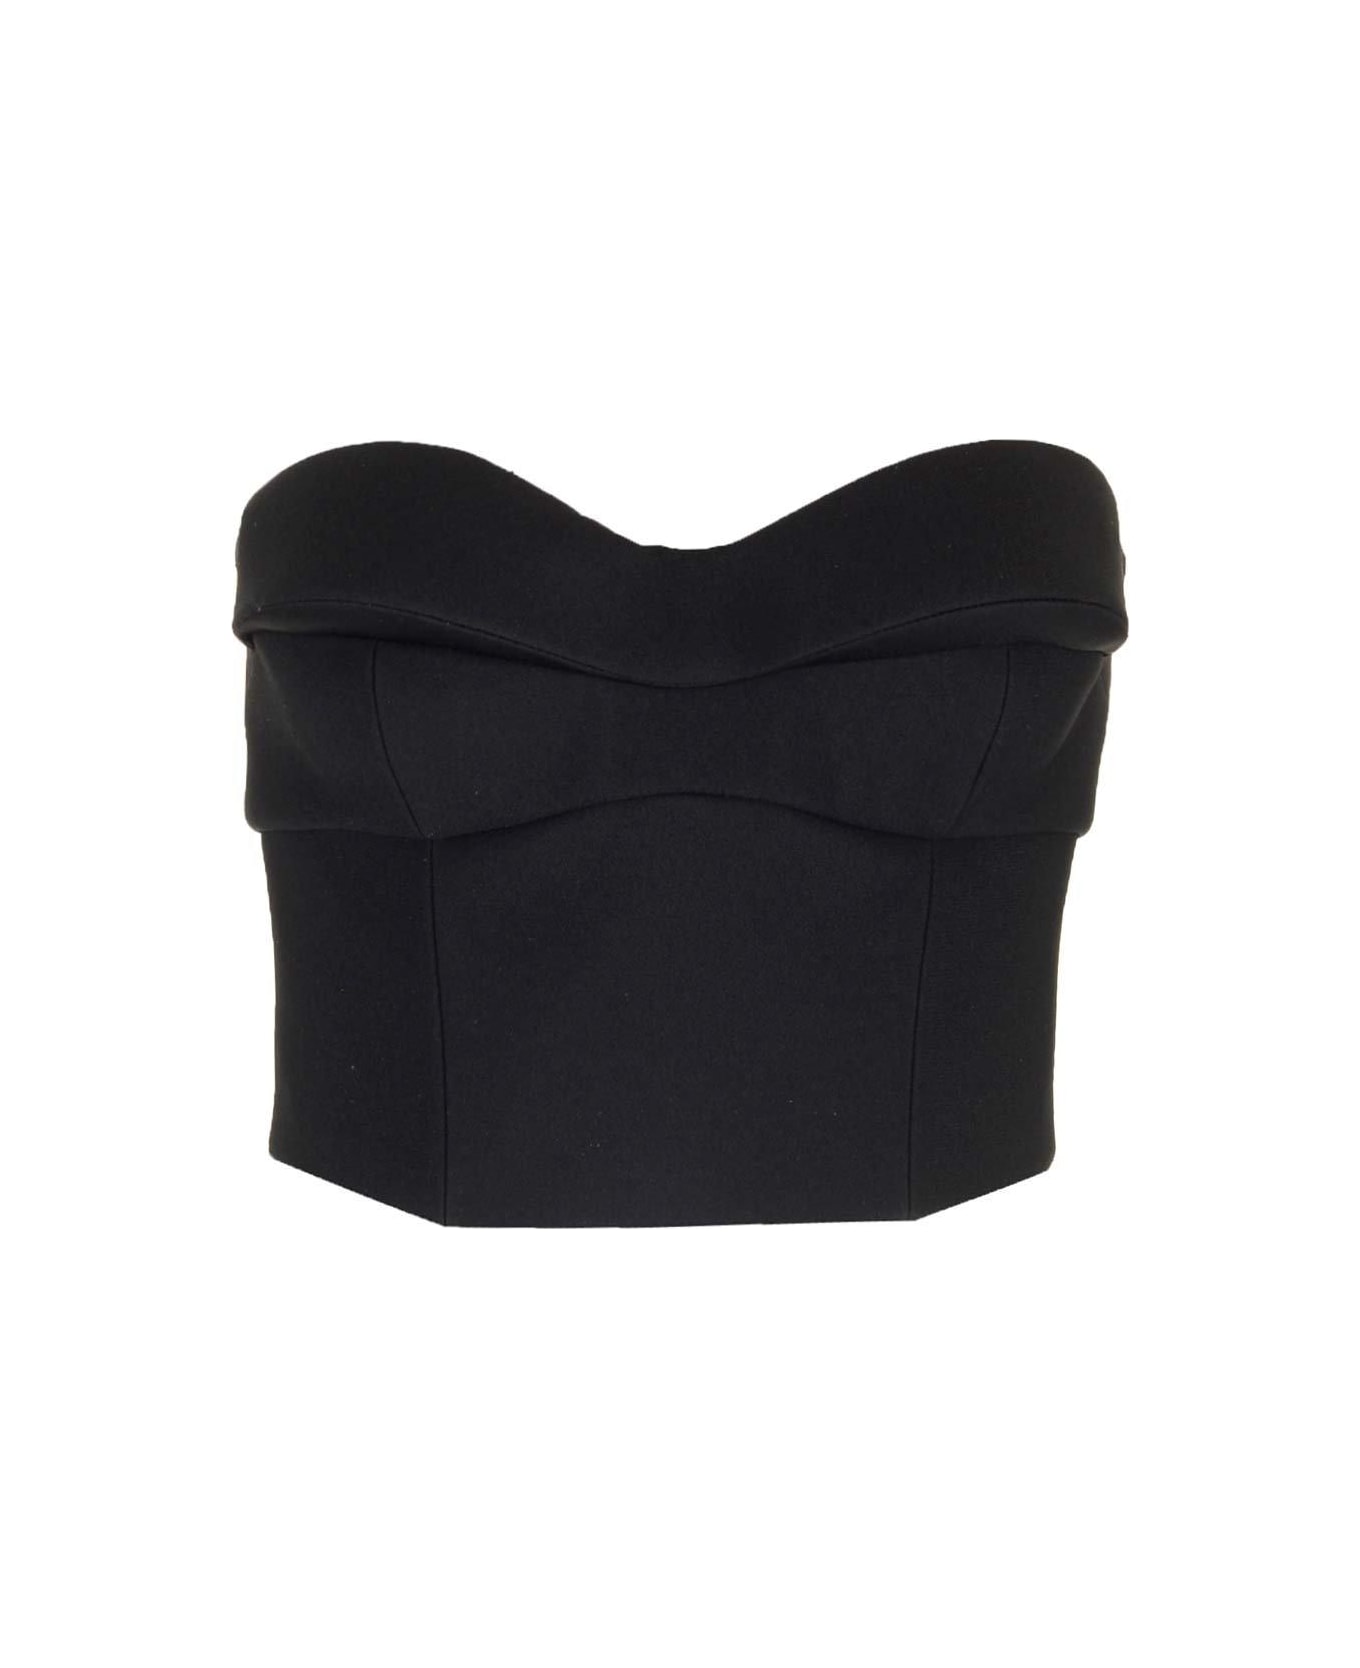 Versace Strapless Cropped Top - Black